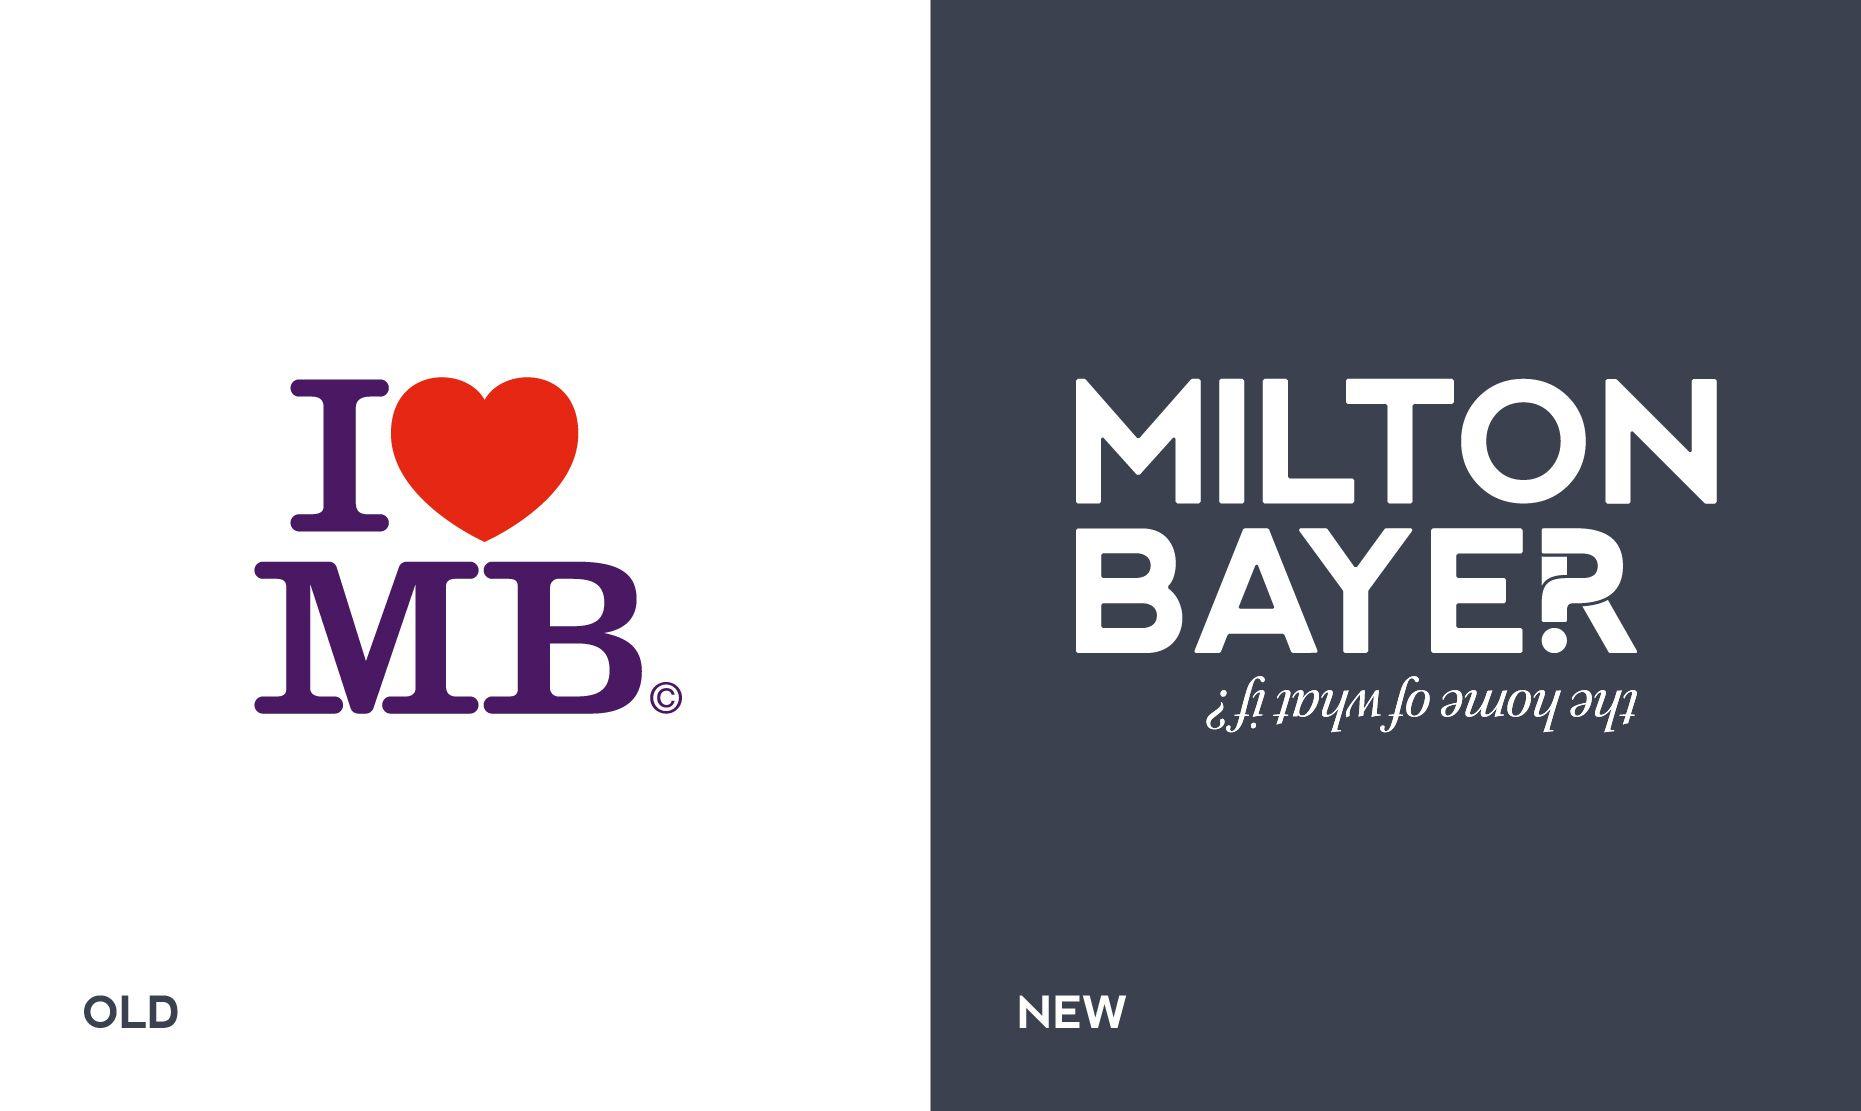 New Bayer Logo - BRAND NEW - Milton Bayer has a new look - REMARK